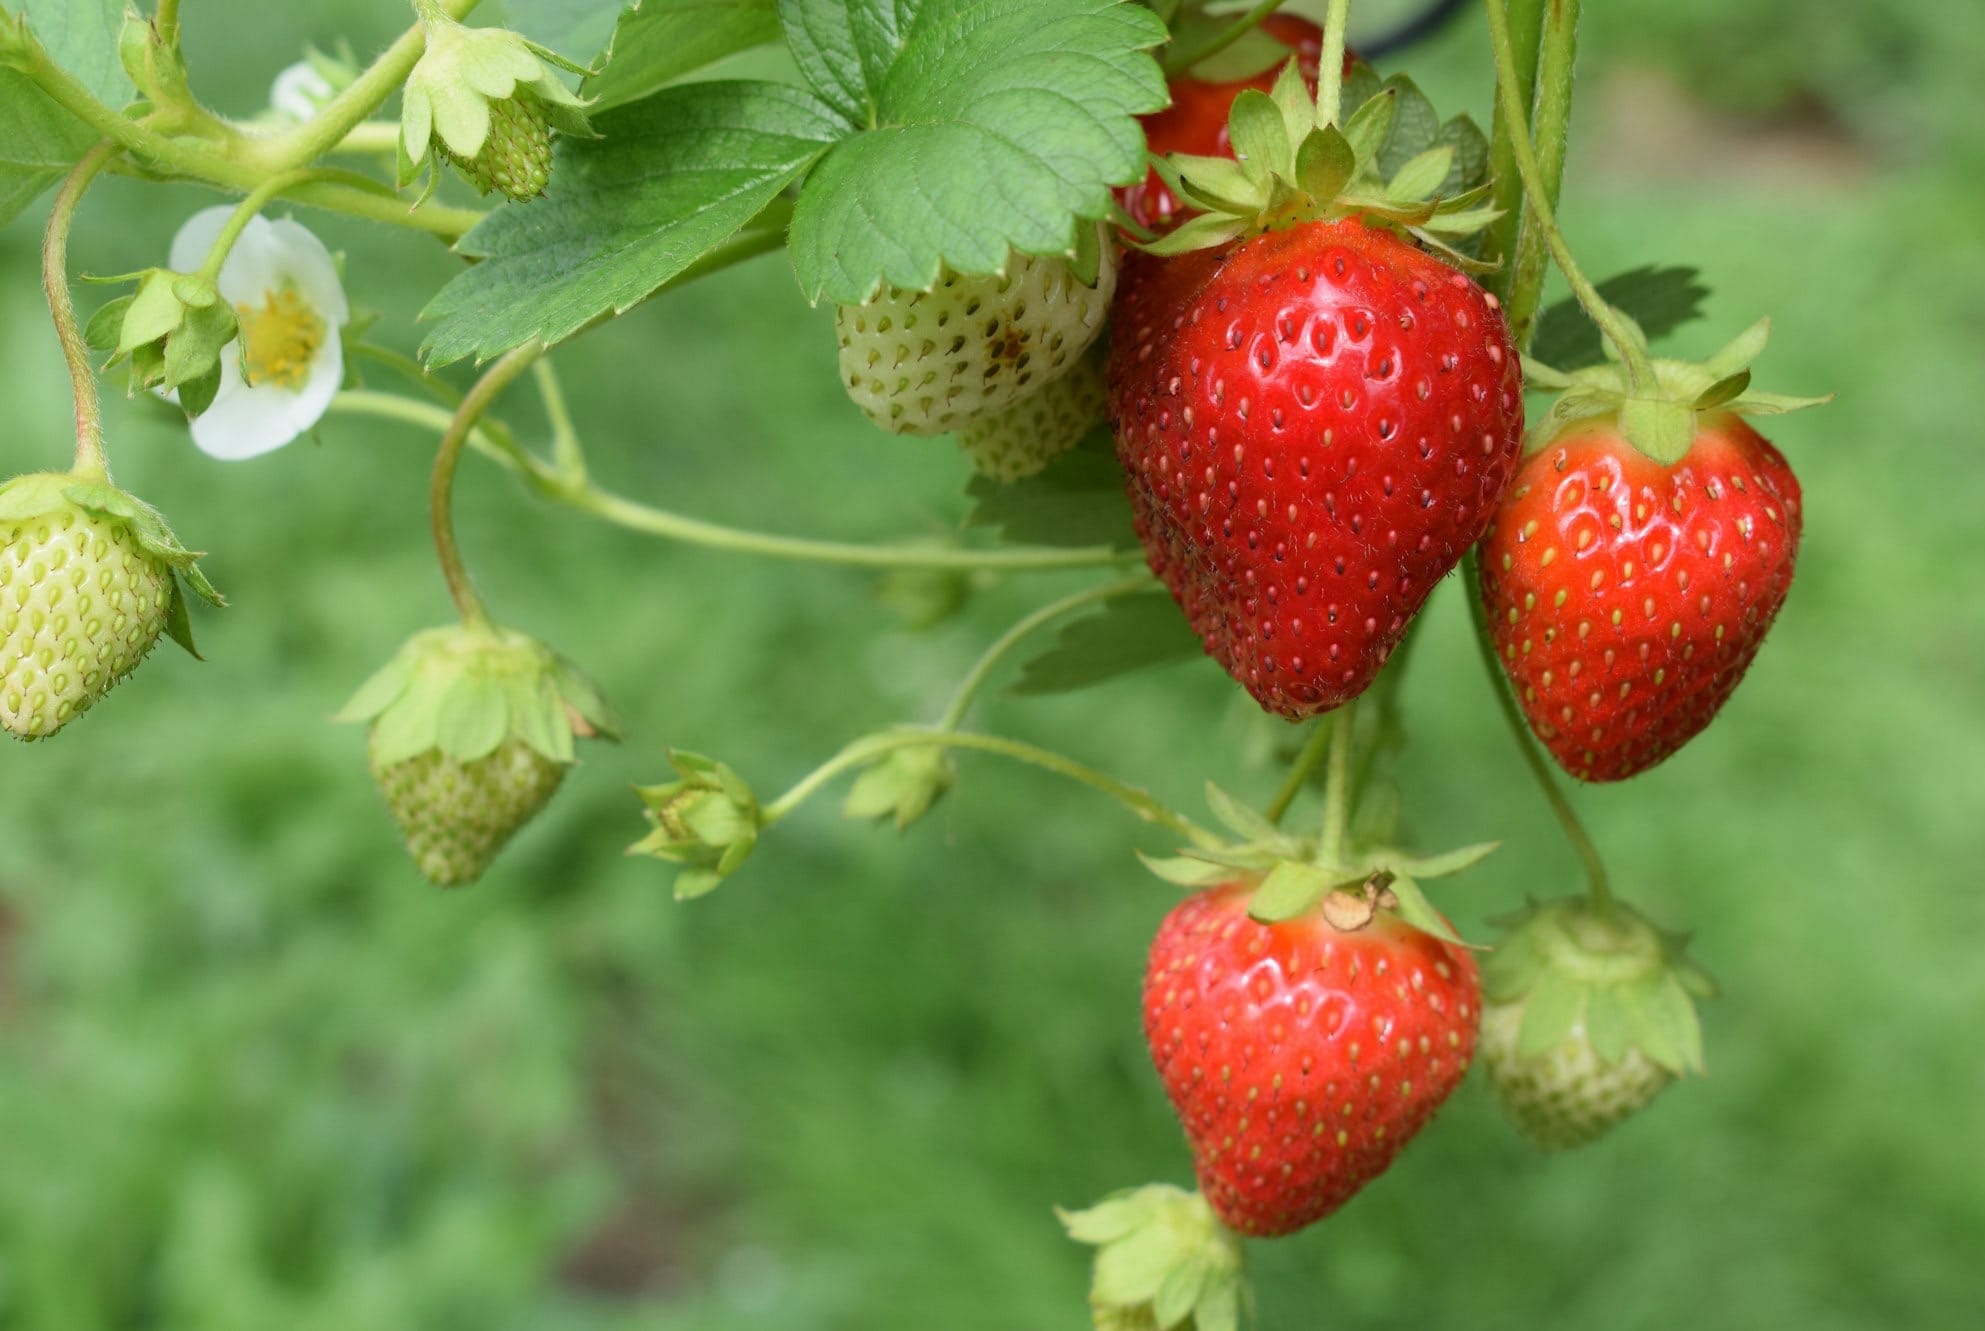 Growing Strawberries are both fun and easy